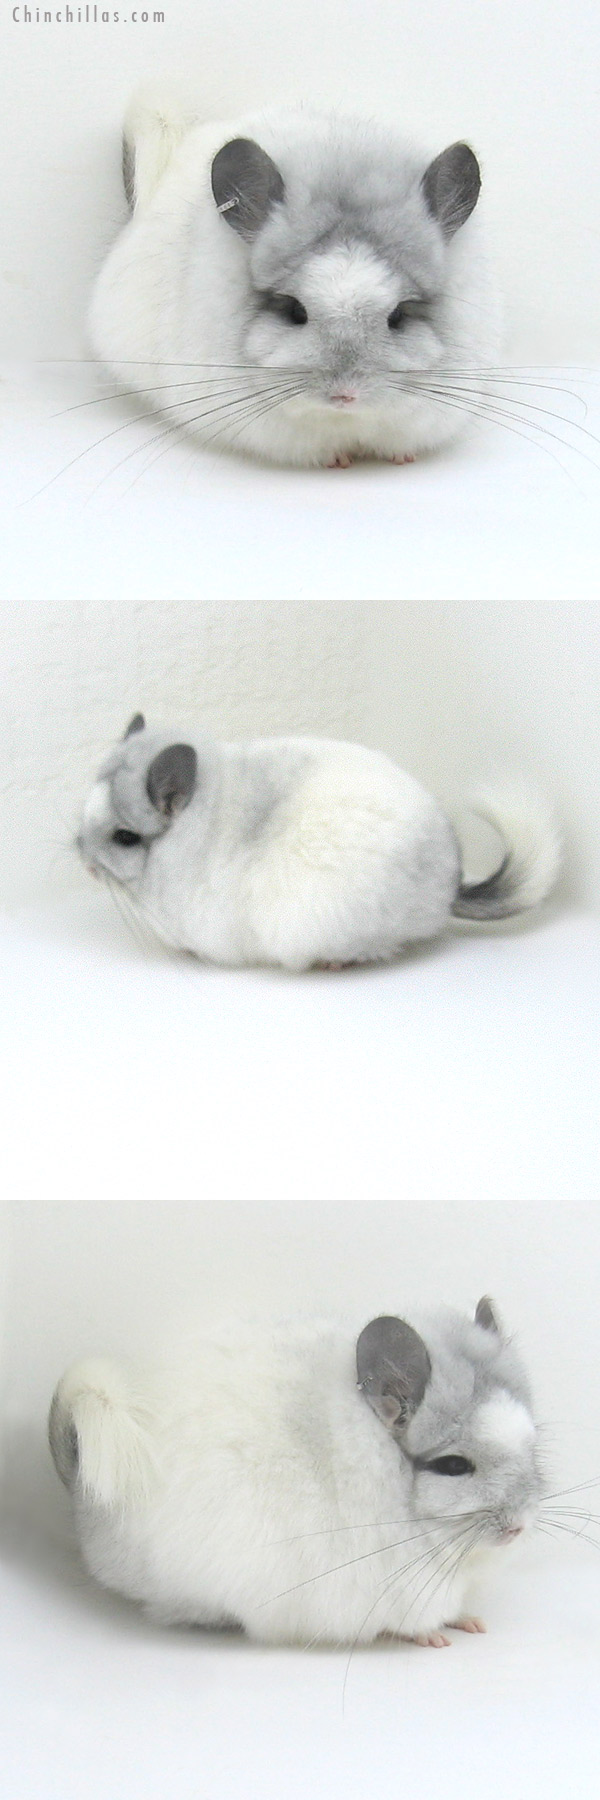 Chinchilla or related item offered for sale or export on Chinchillas.com - 12007 Exceptional White Mosaic Royal Persian Angora Female Chinchilla